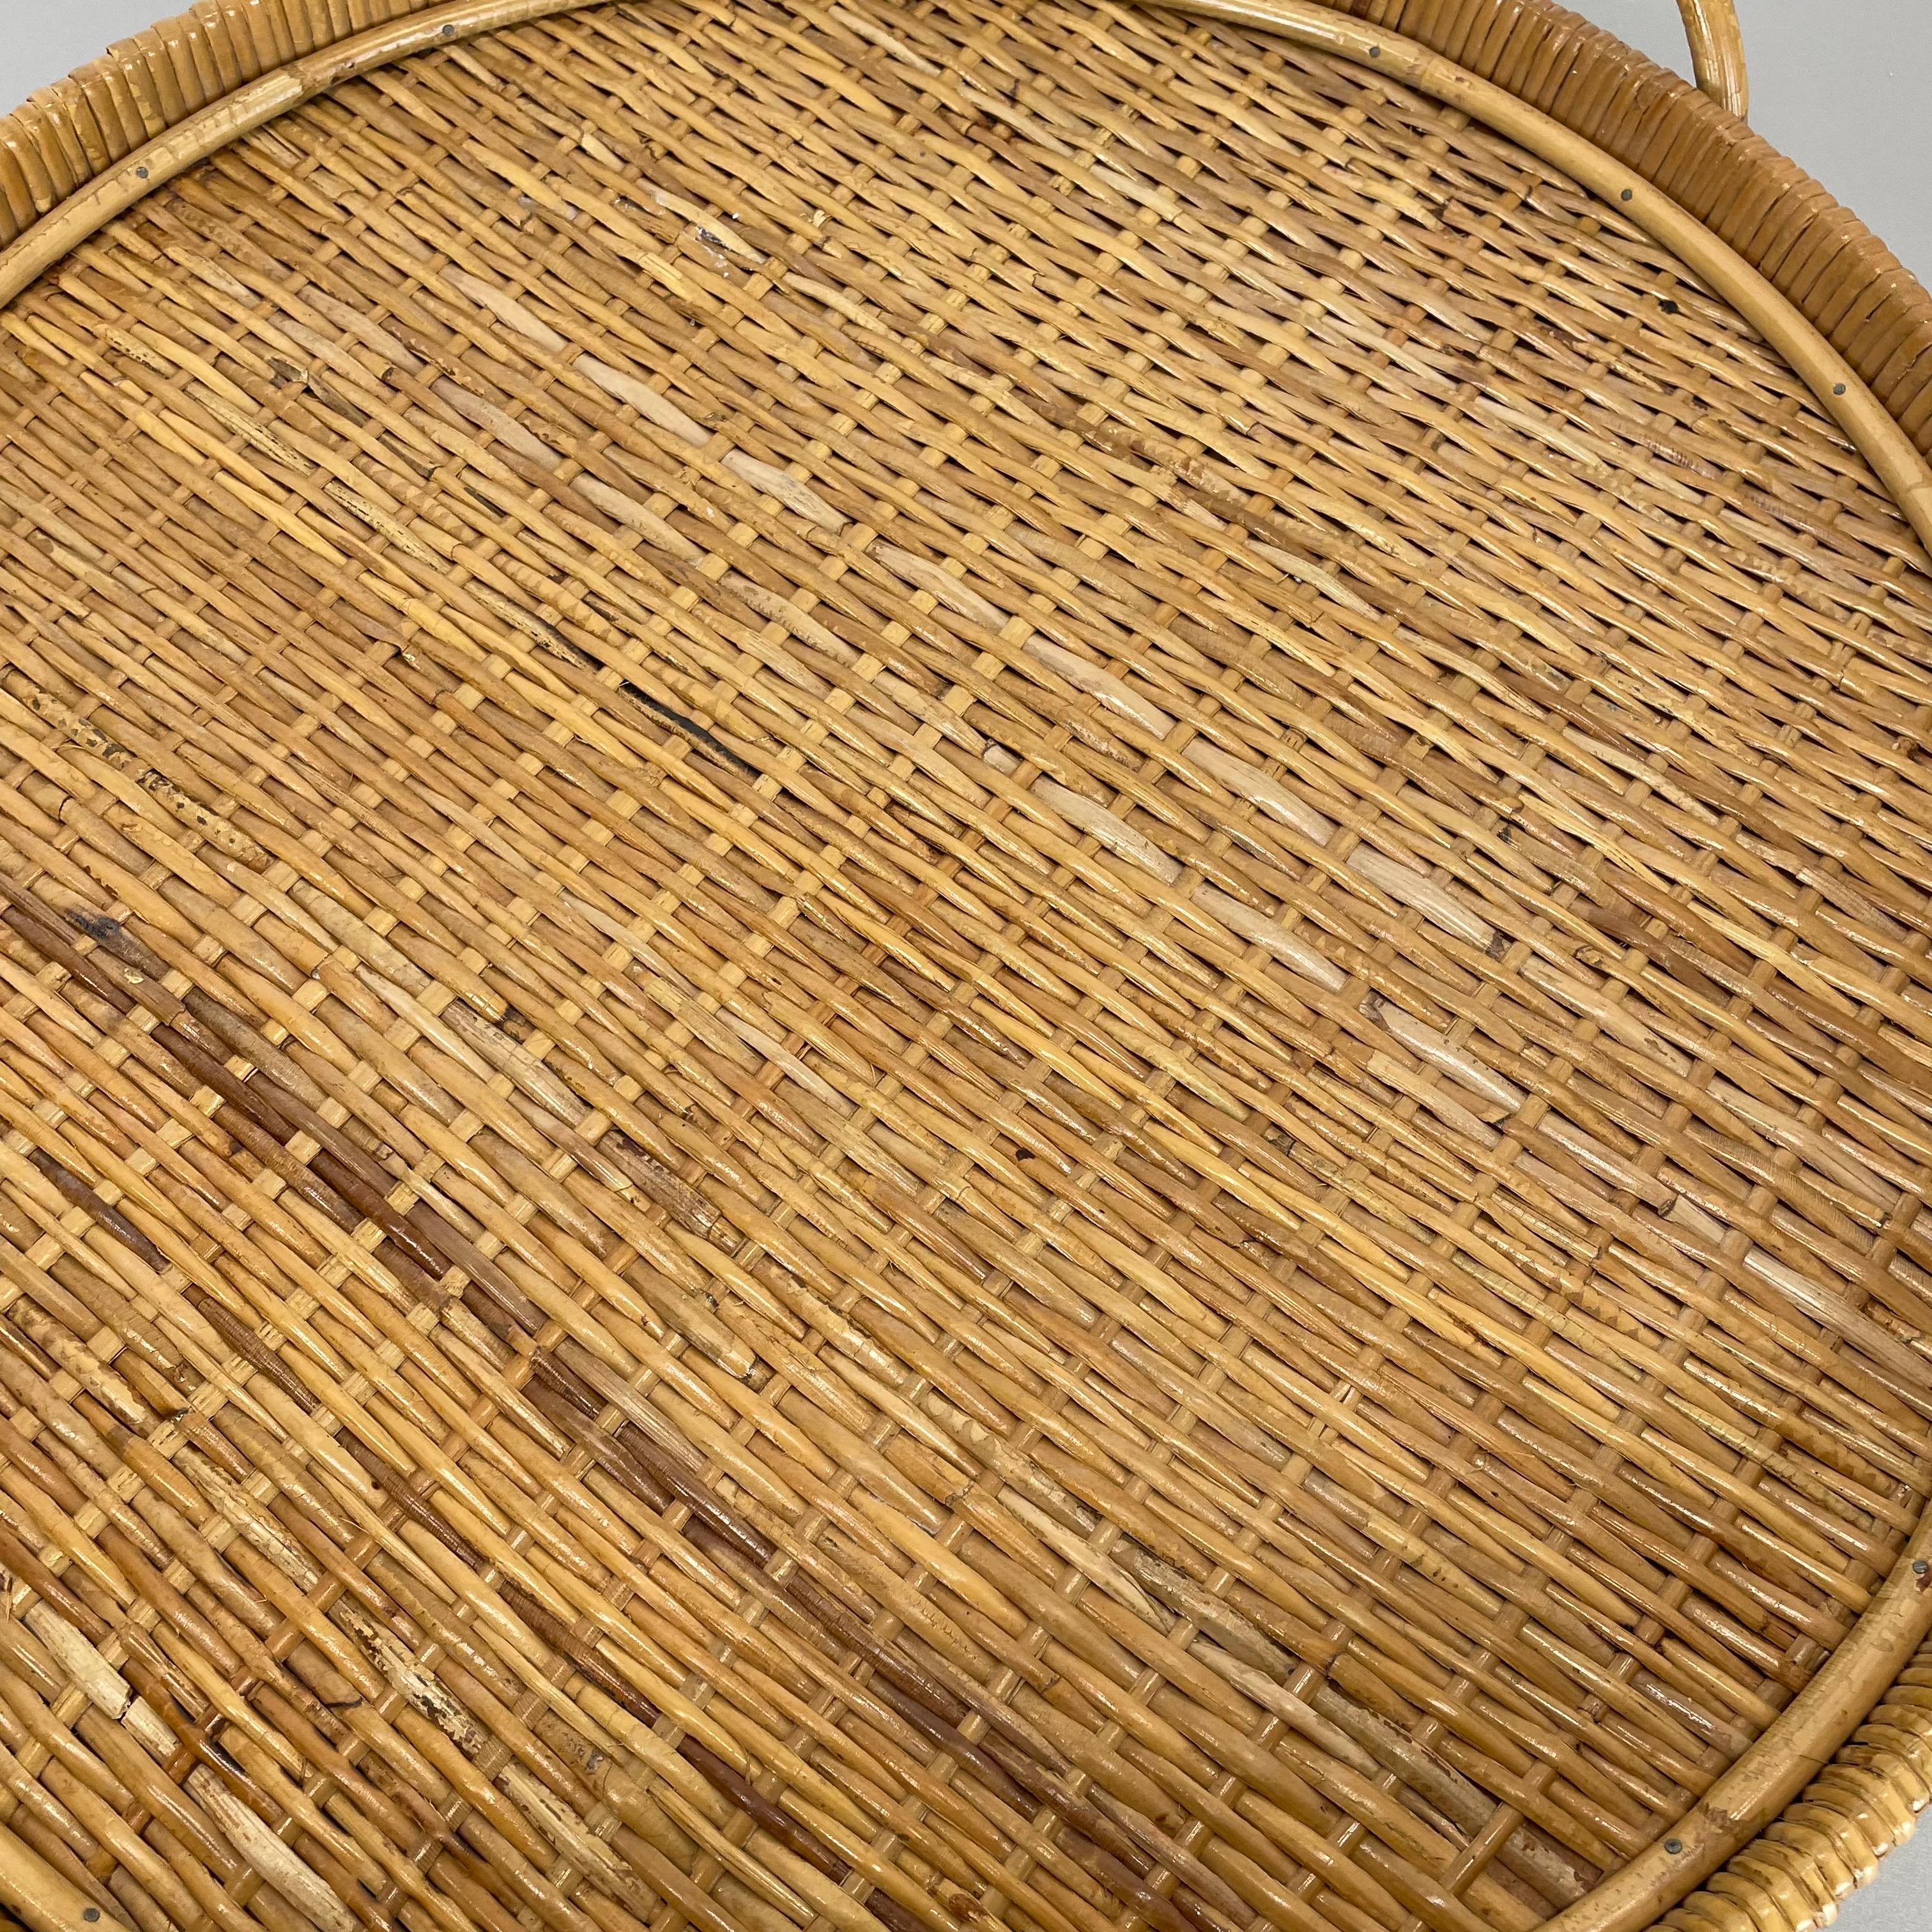 Large 50cm Rattan Rotin tray element in Gabriella Crespi Style, Italy, 1970s For Sale 12